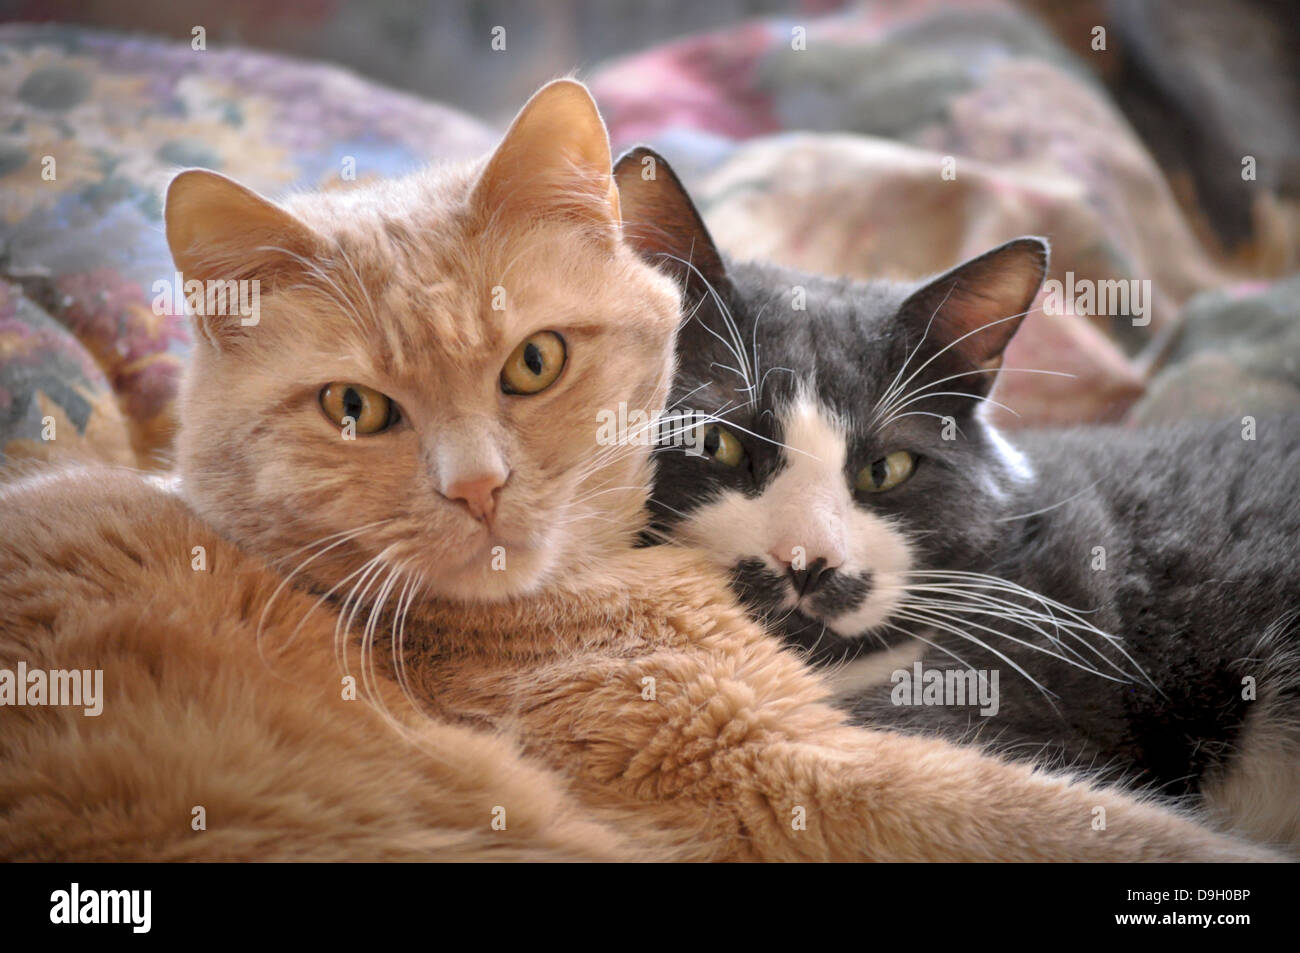 two house cats napping together Stock Photo